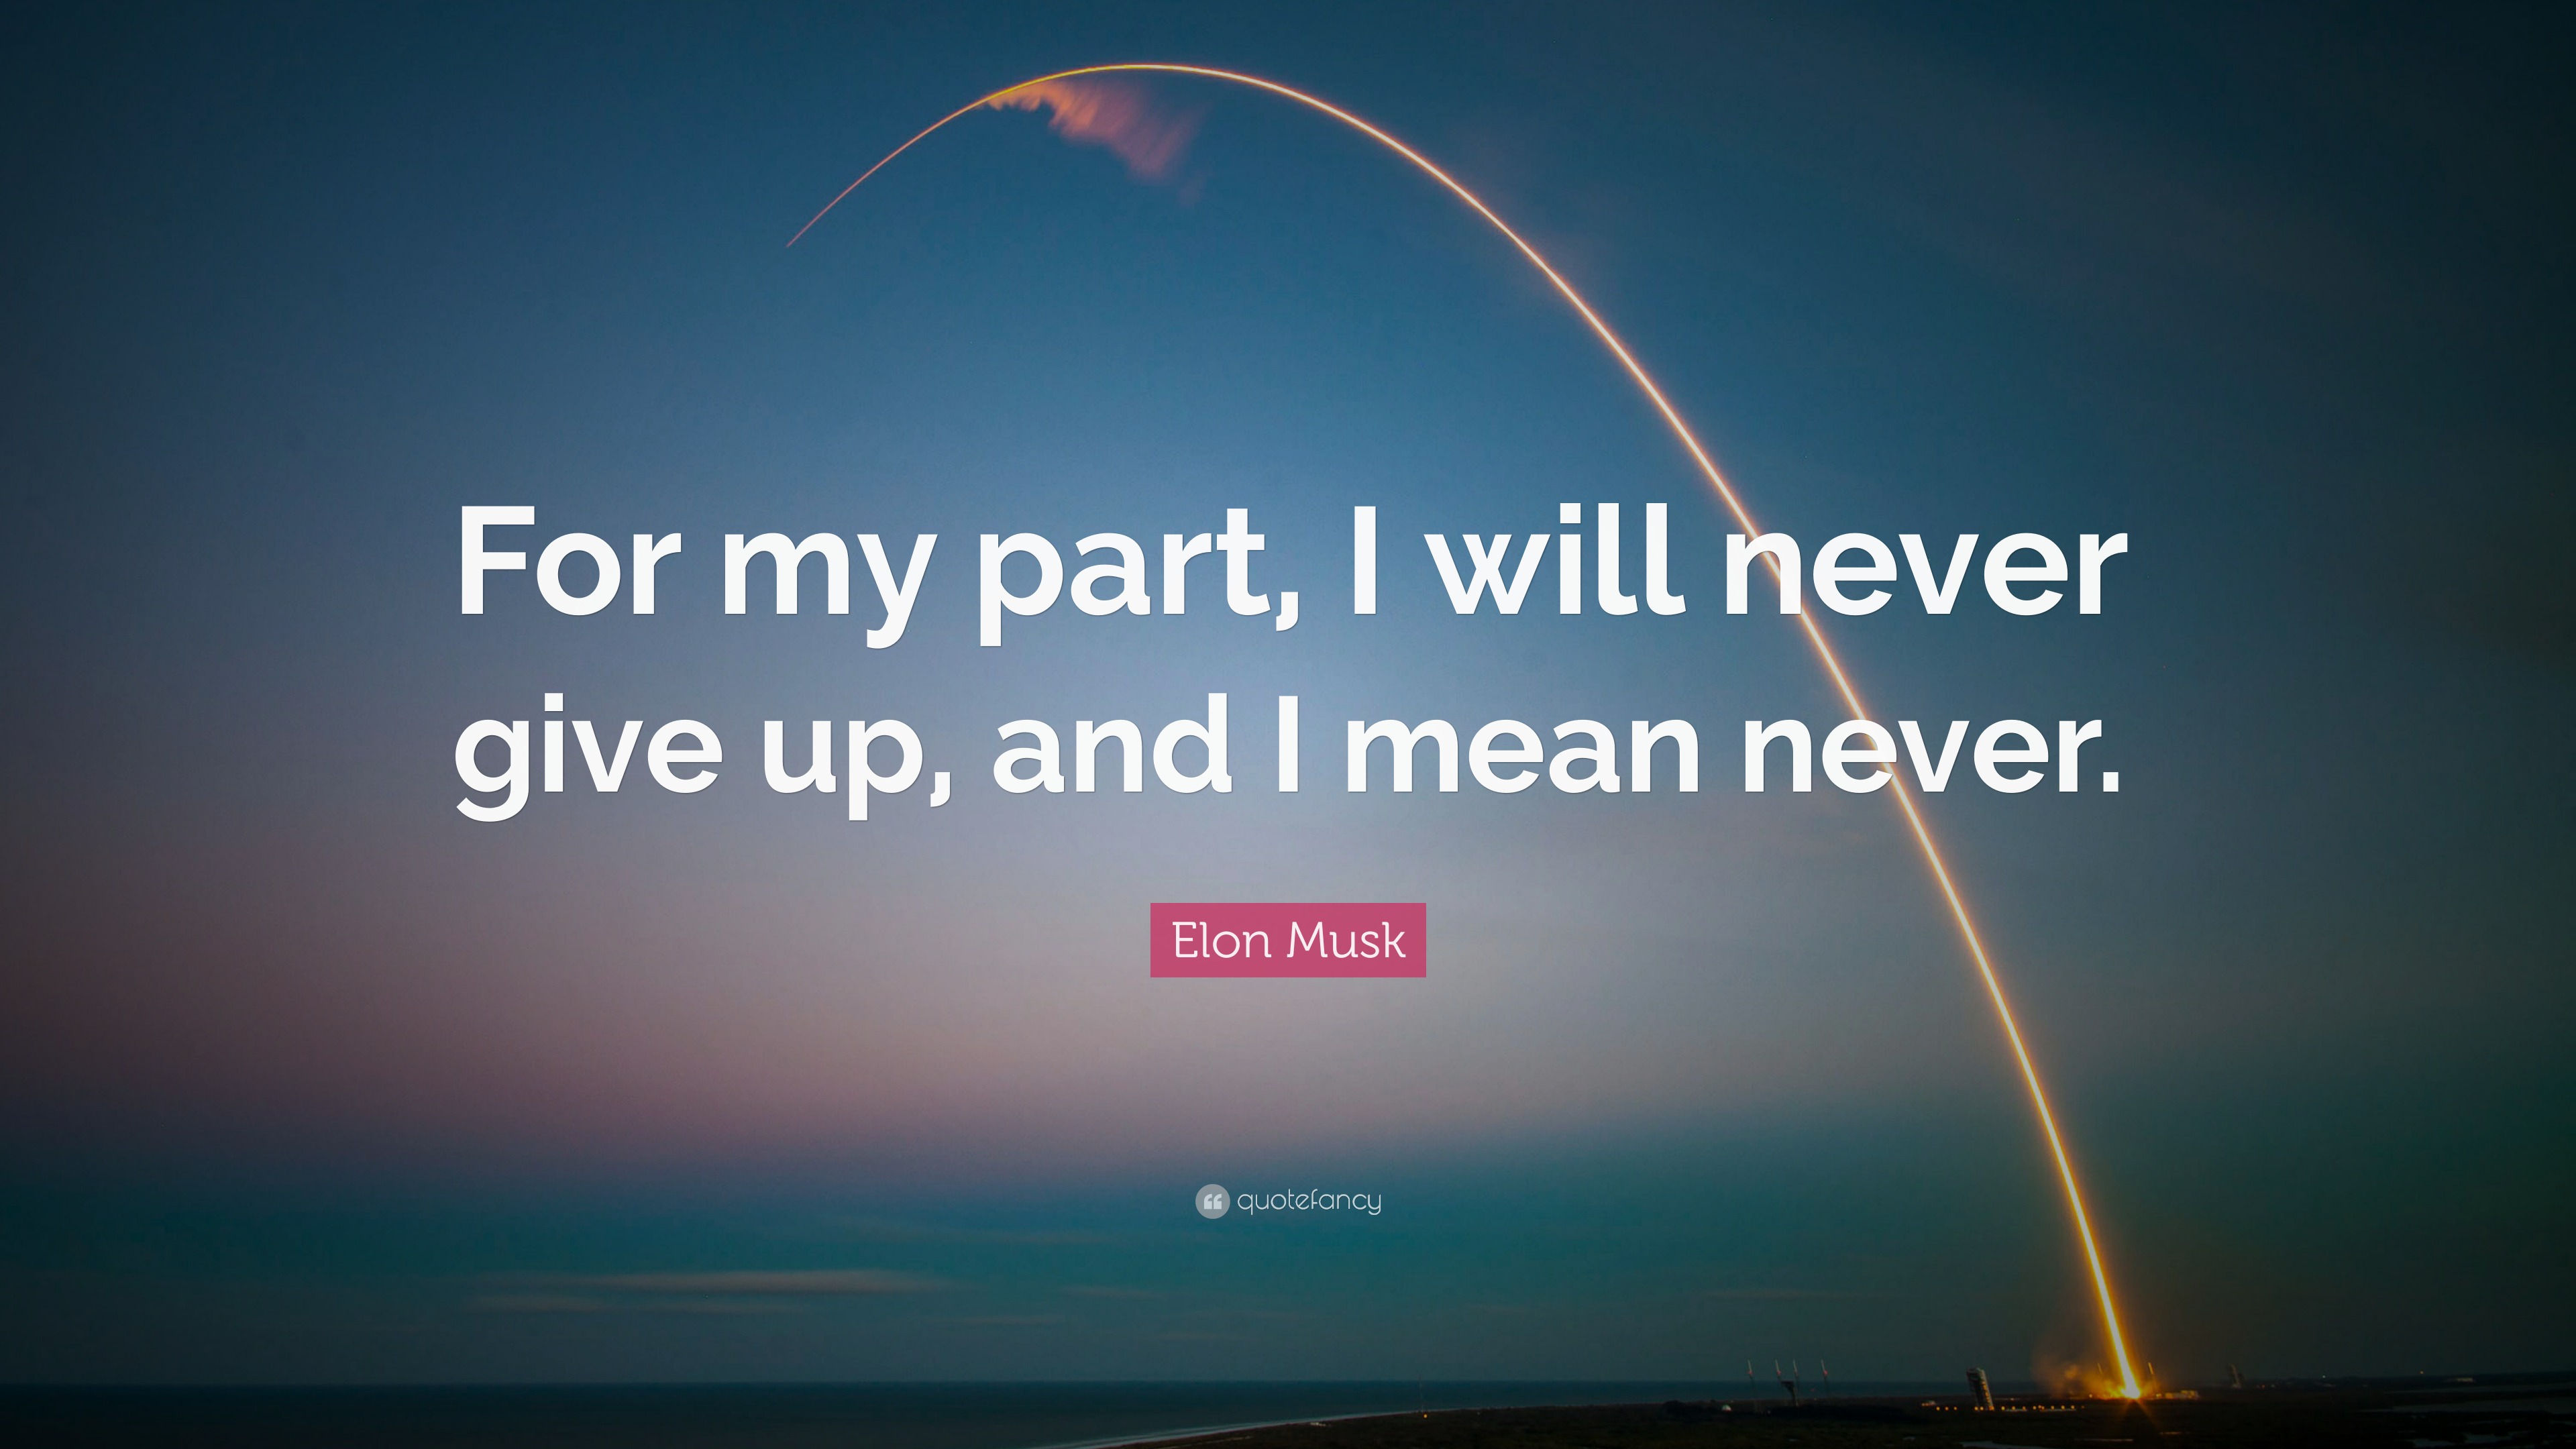 Elon Musk Quote: “For my part, I will never give up, and I mean never.”